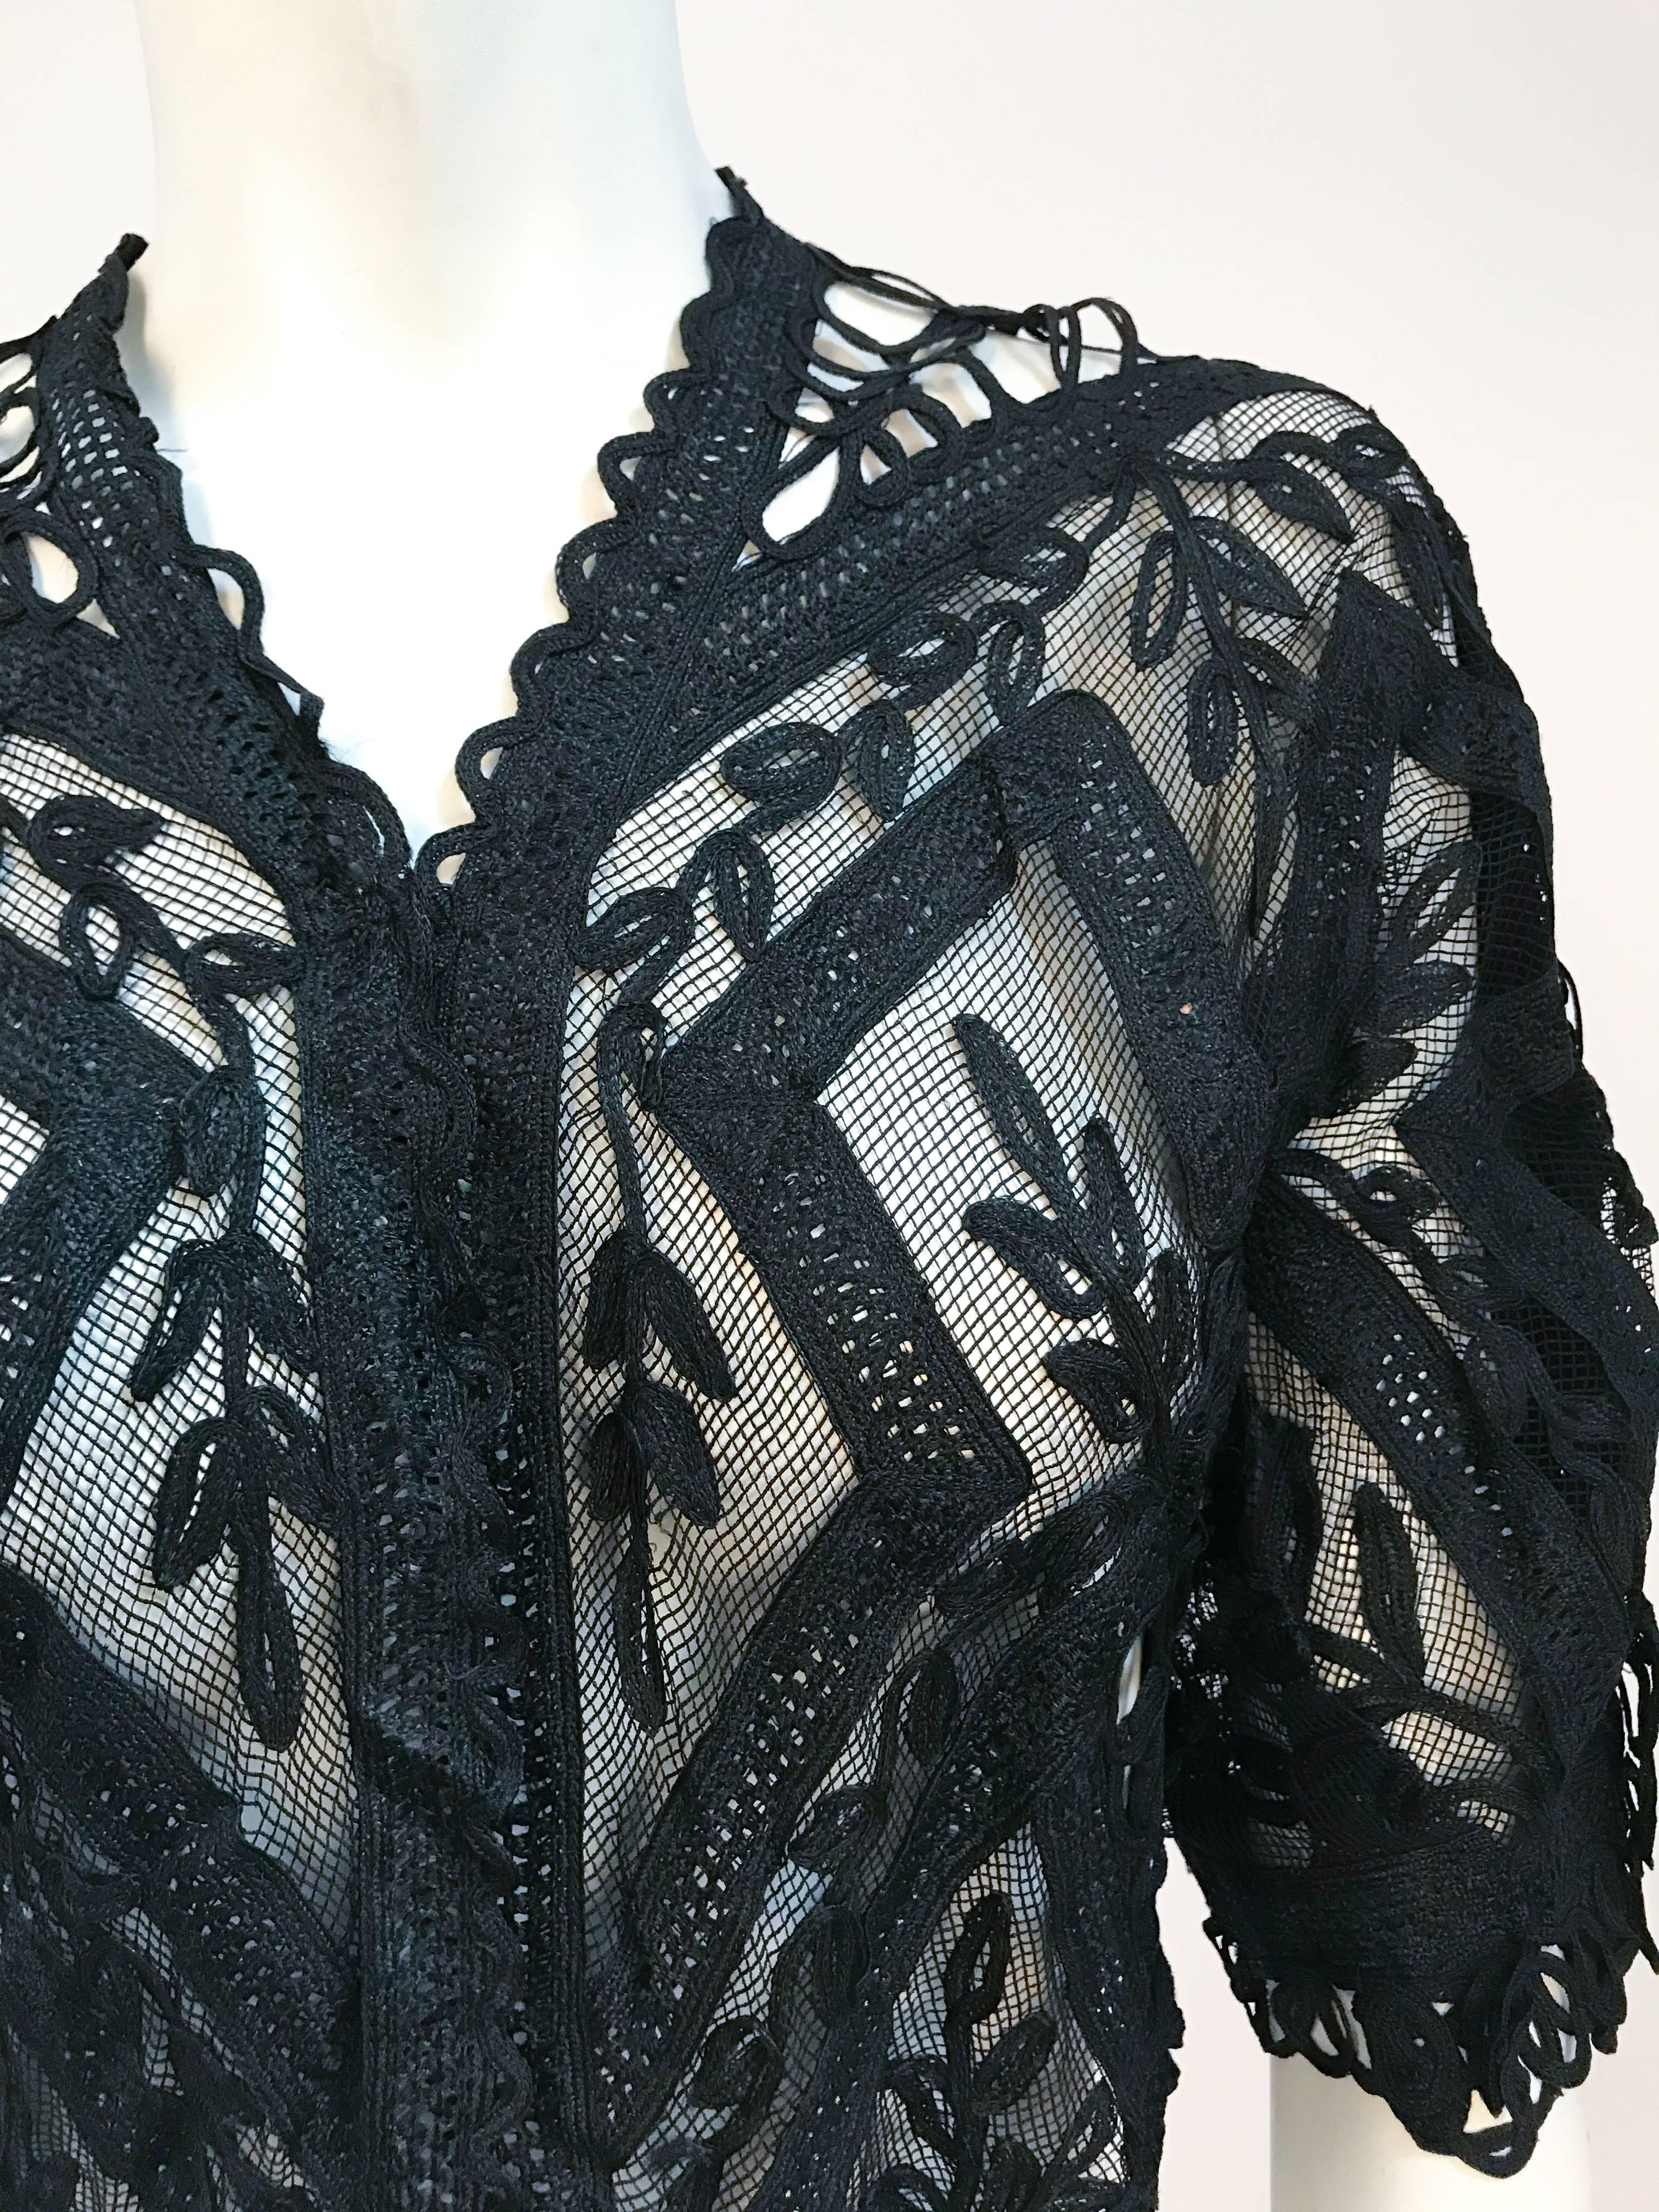 1900s Black Lace Mesh Bolero. Mesh base with lace detailing, hook and eye closures at front. 